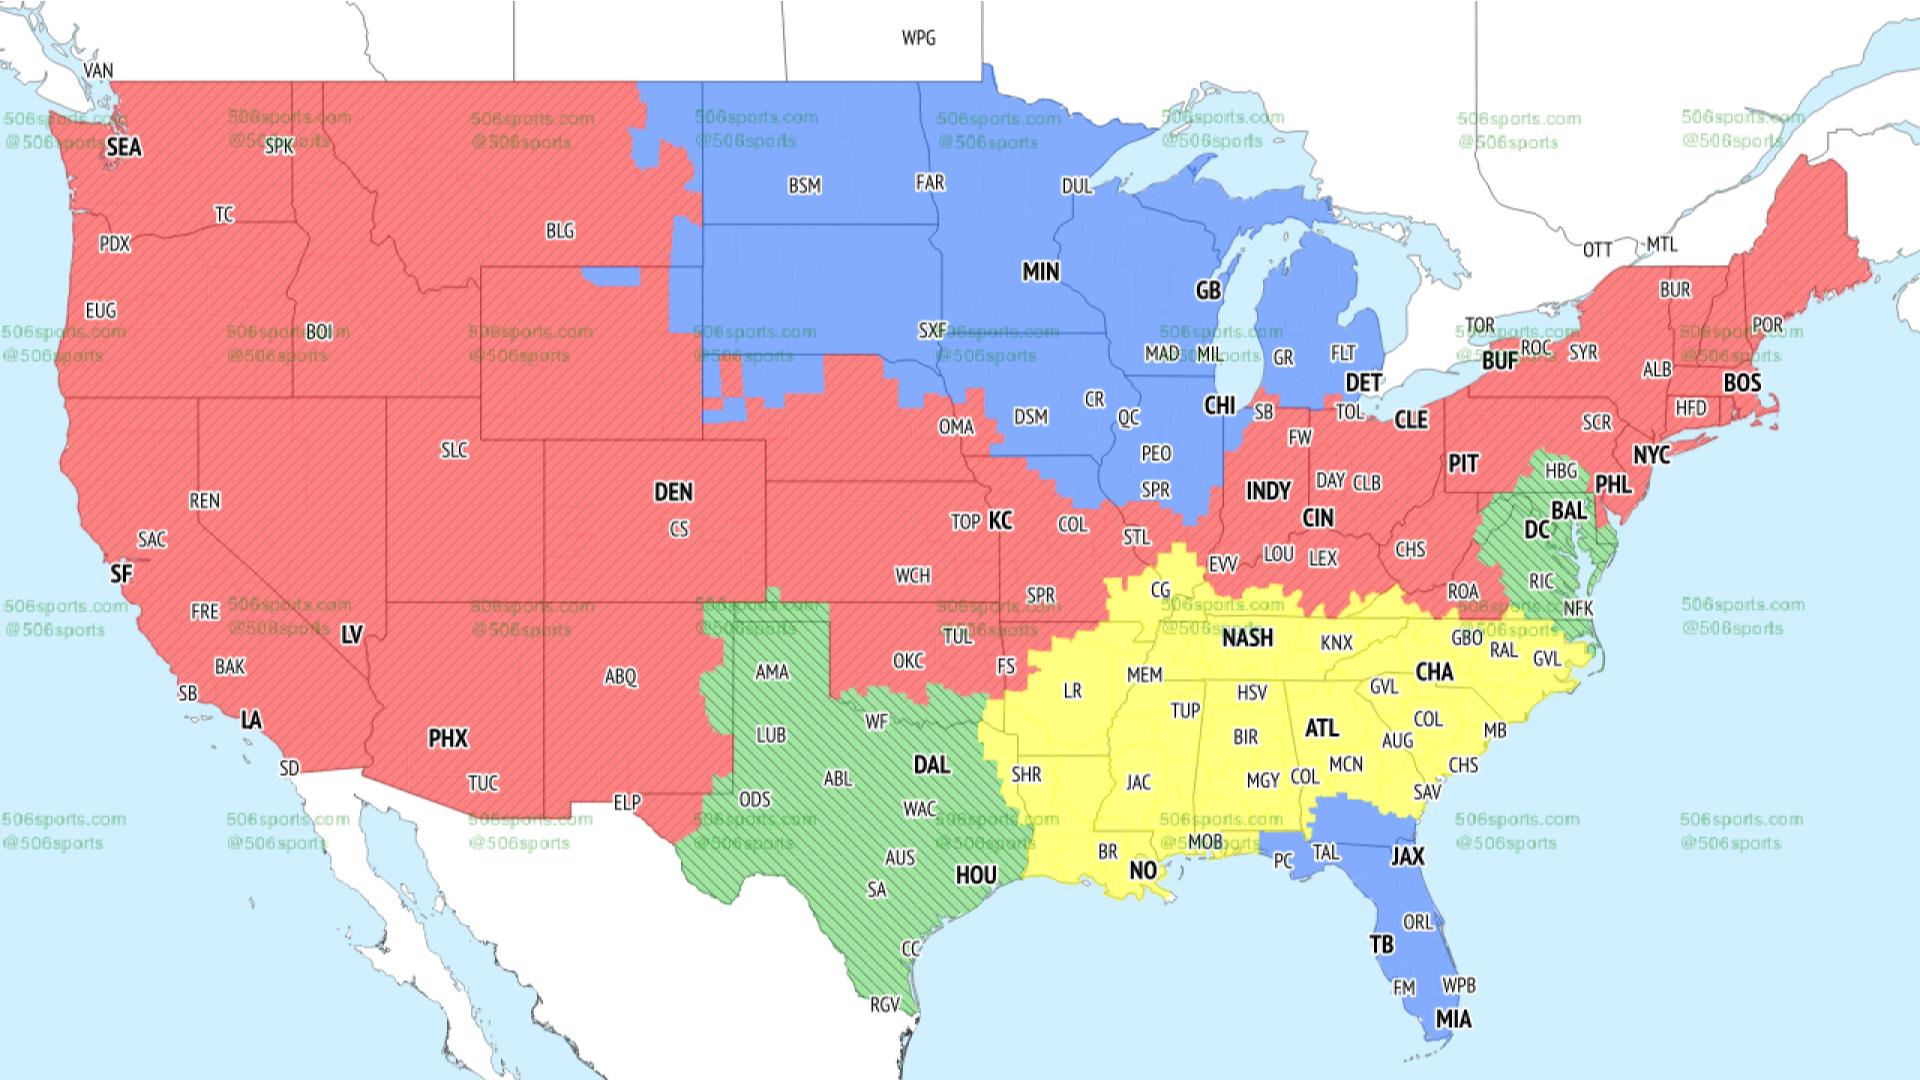 what network is broadcasting nfl today